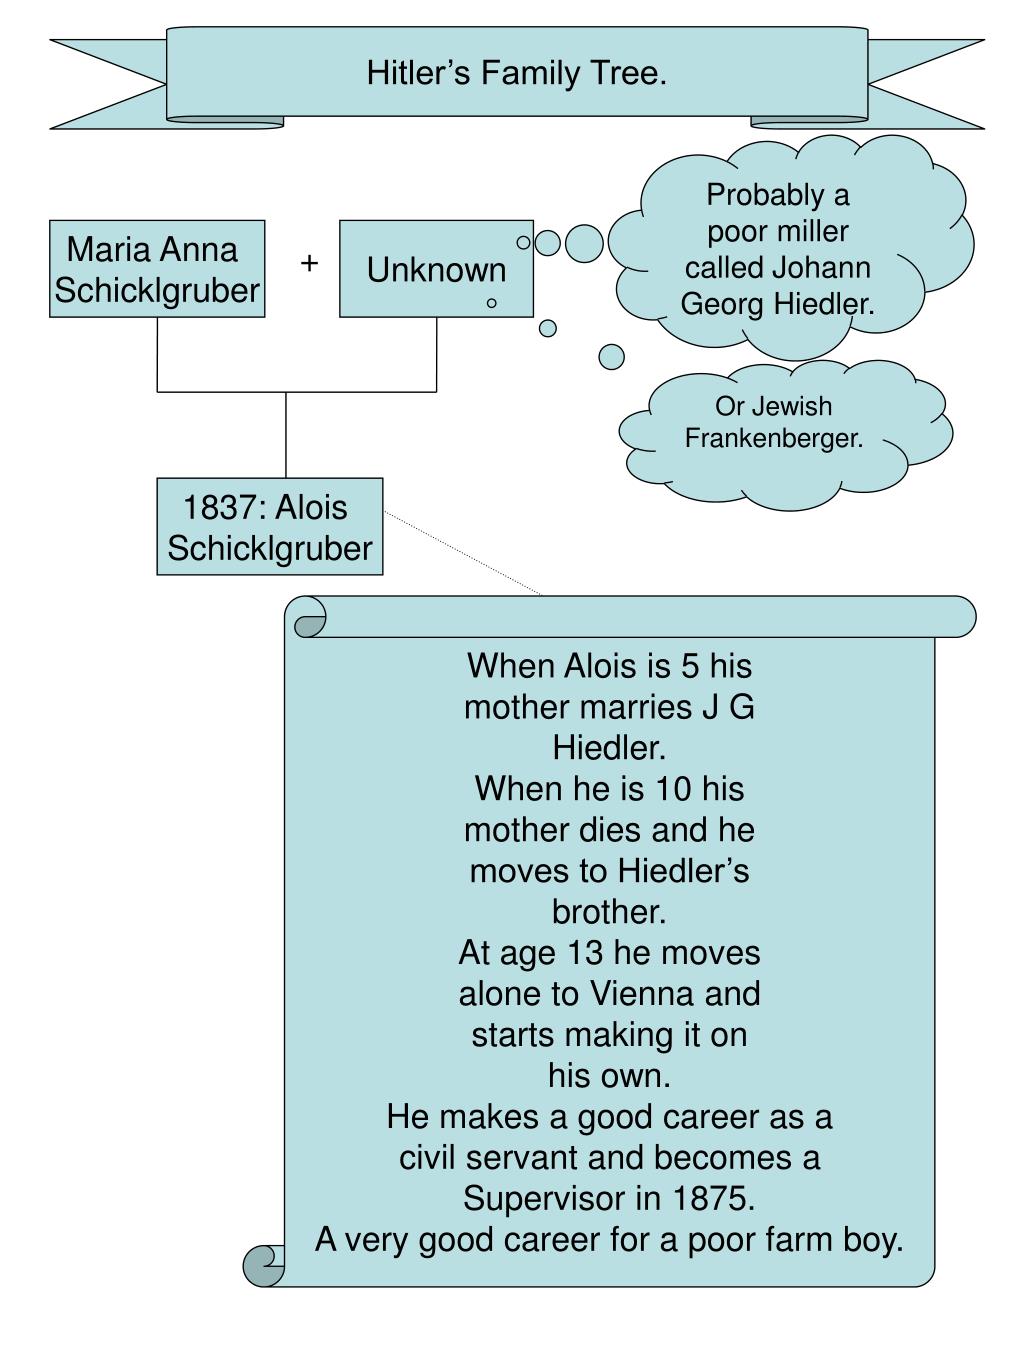 PPT Hitler’s Family Tree. PowerPoint Presentation, free download ID